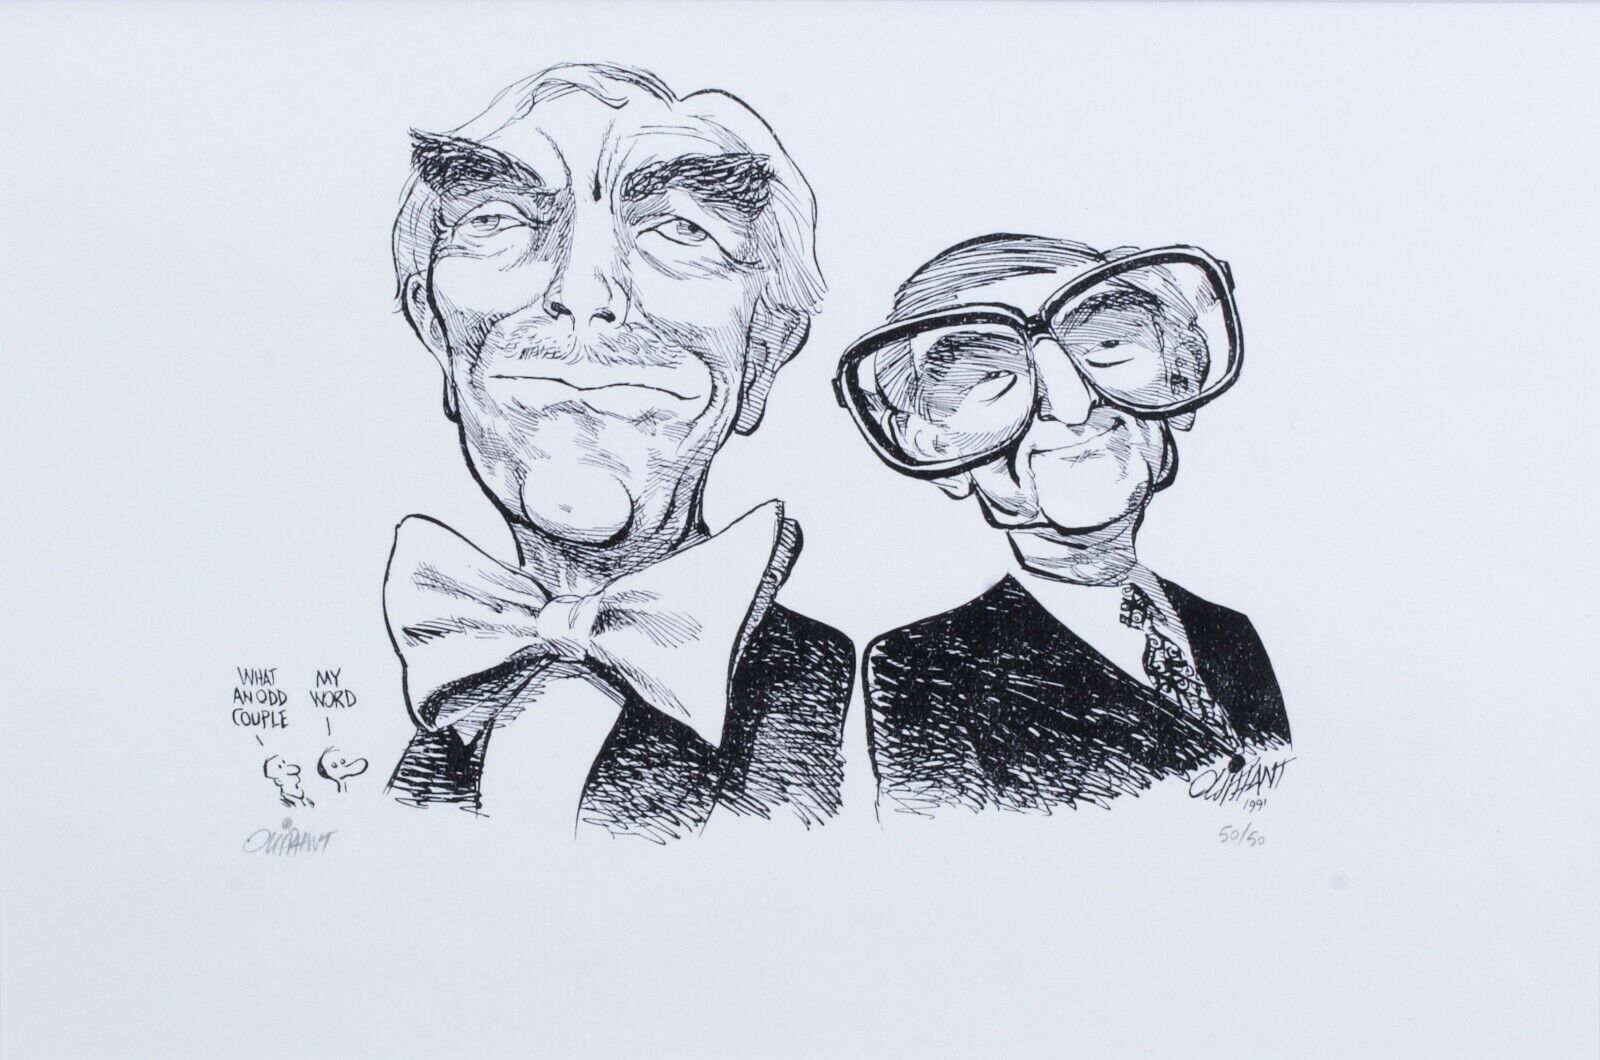 PAT OLIPHANT Political Cartoon Signed 50/50 1991 What and Odd Couple/ My Word 